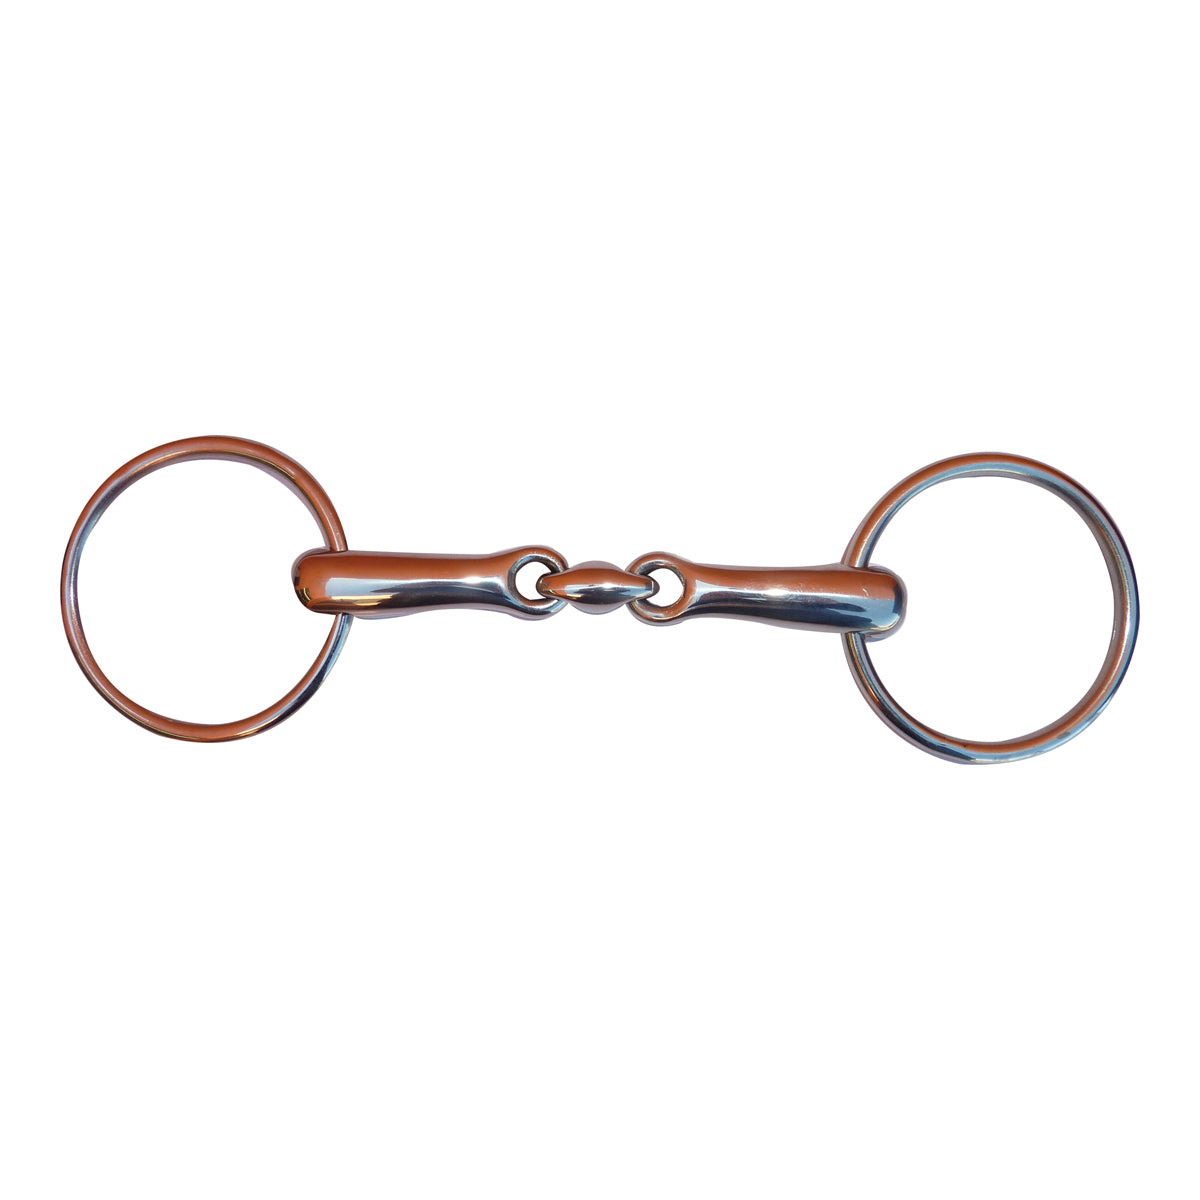 Showcraft Oval Link Training Bit 21mm - The Trading Stables